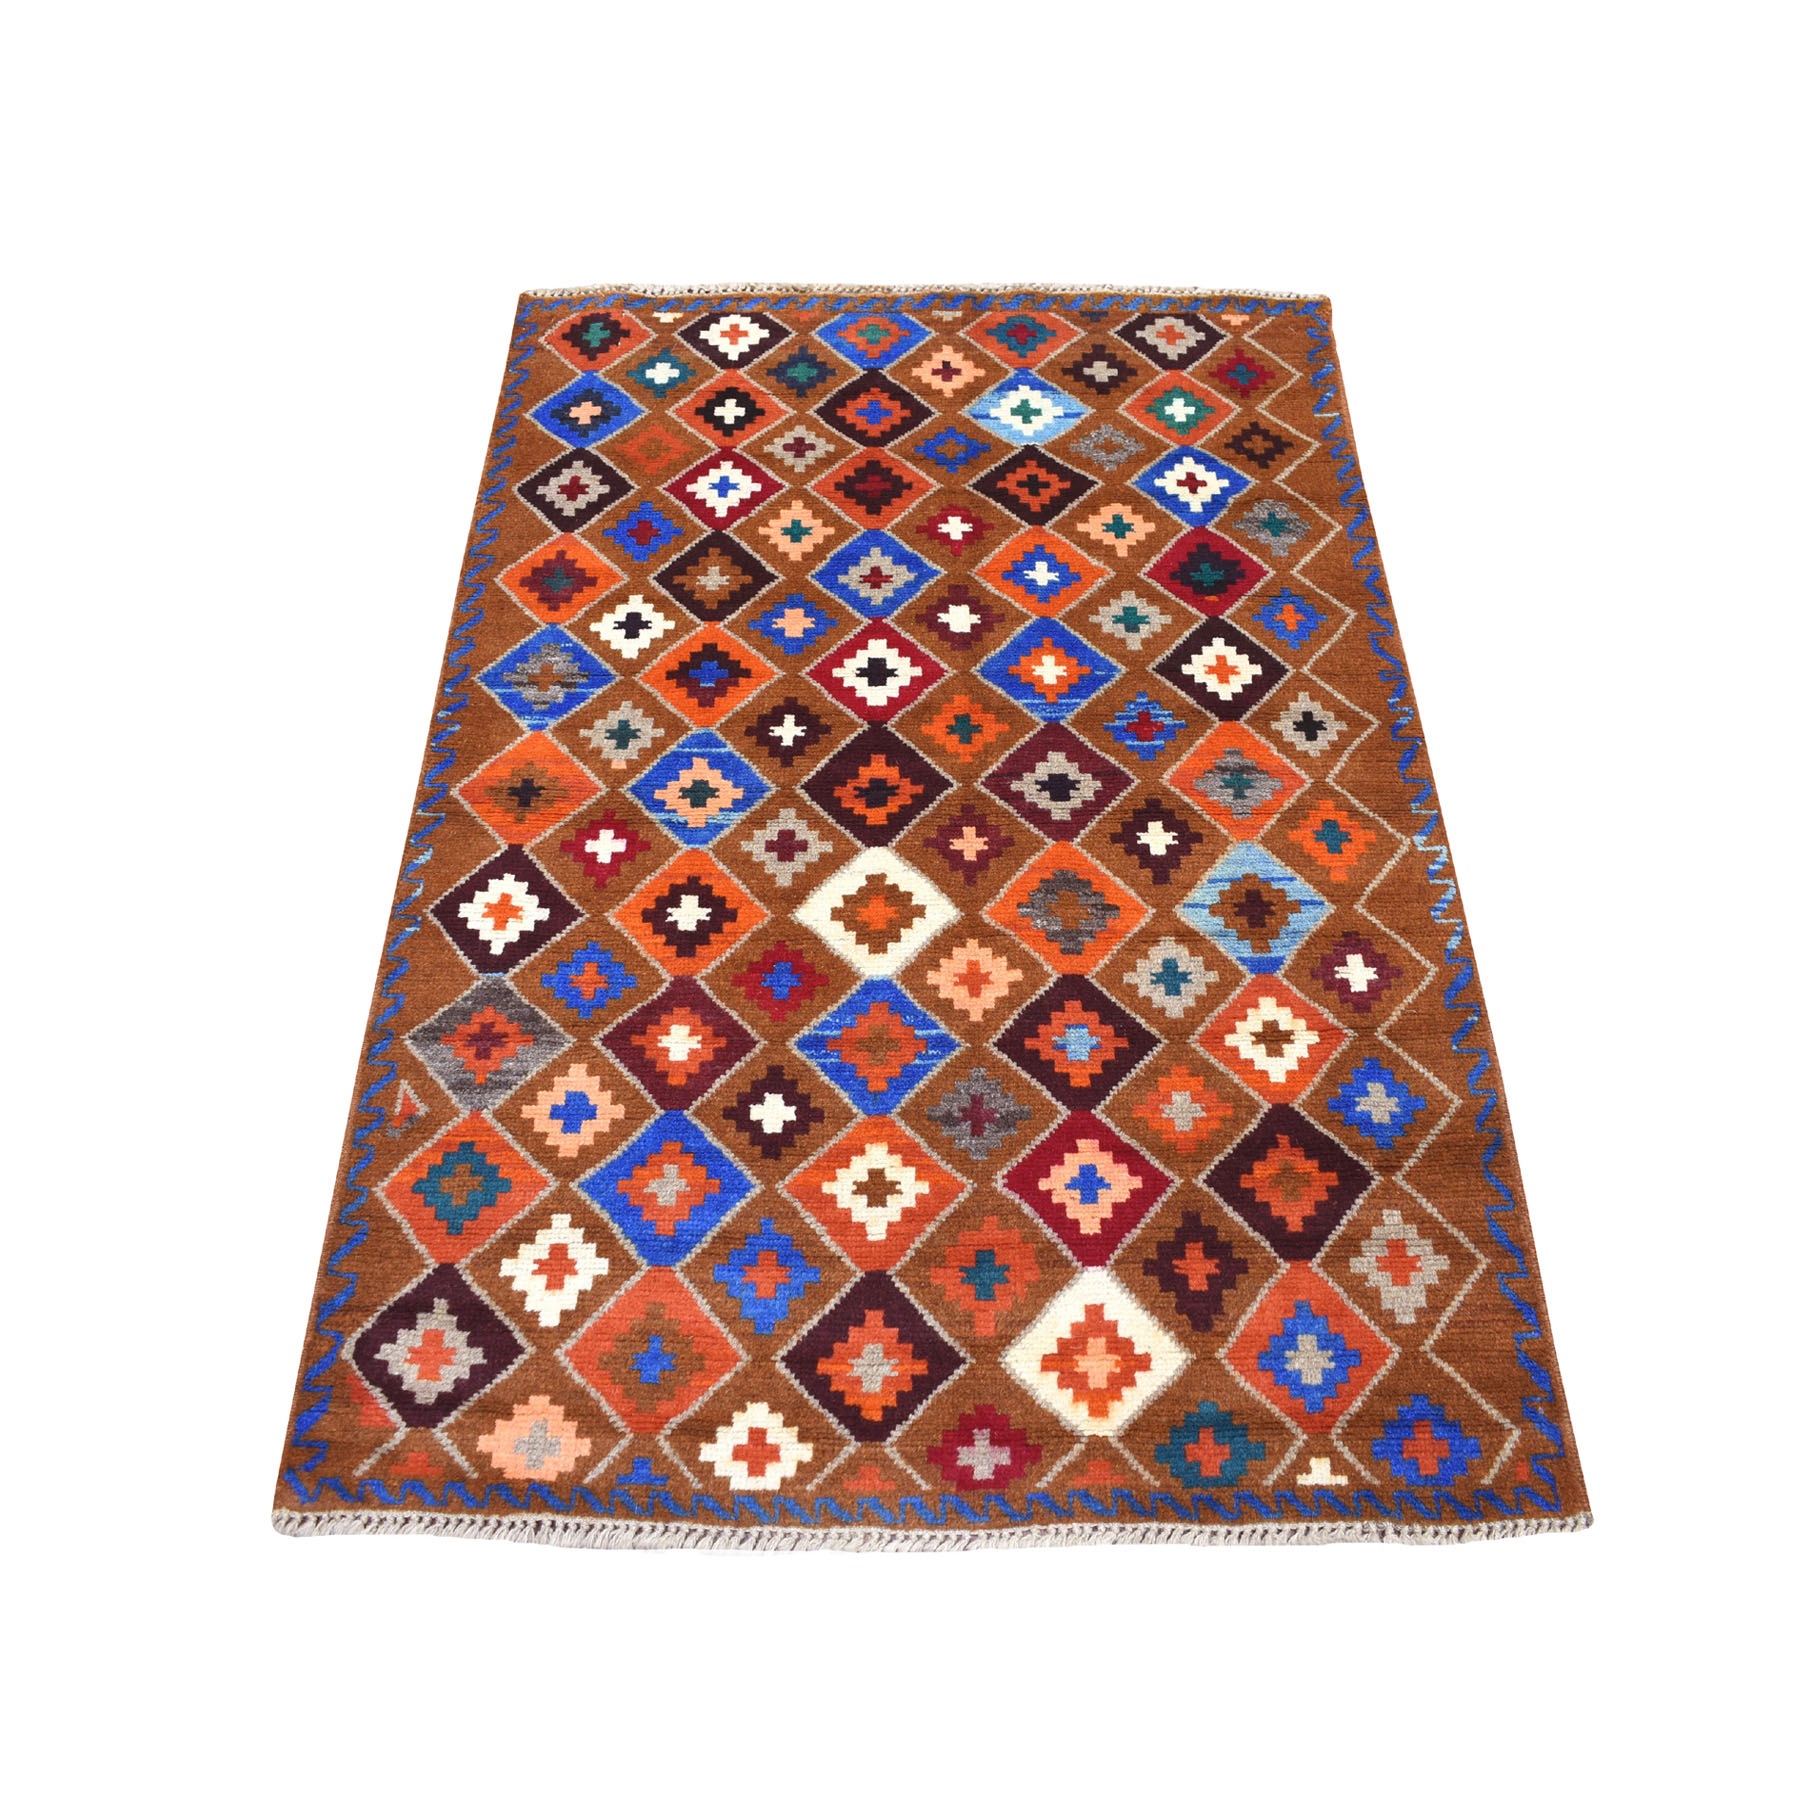 3'5"x4'10" Brown Geometric Design Colorful Afghan Baluch Pure Wool Hand Woven Oriental Rug 